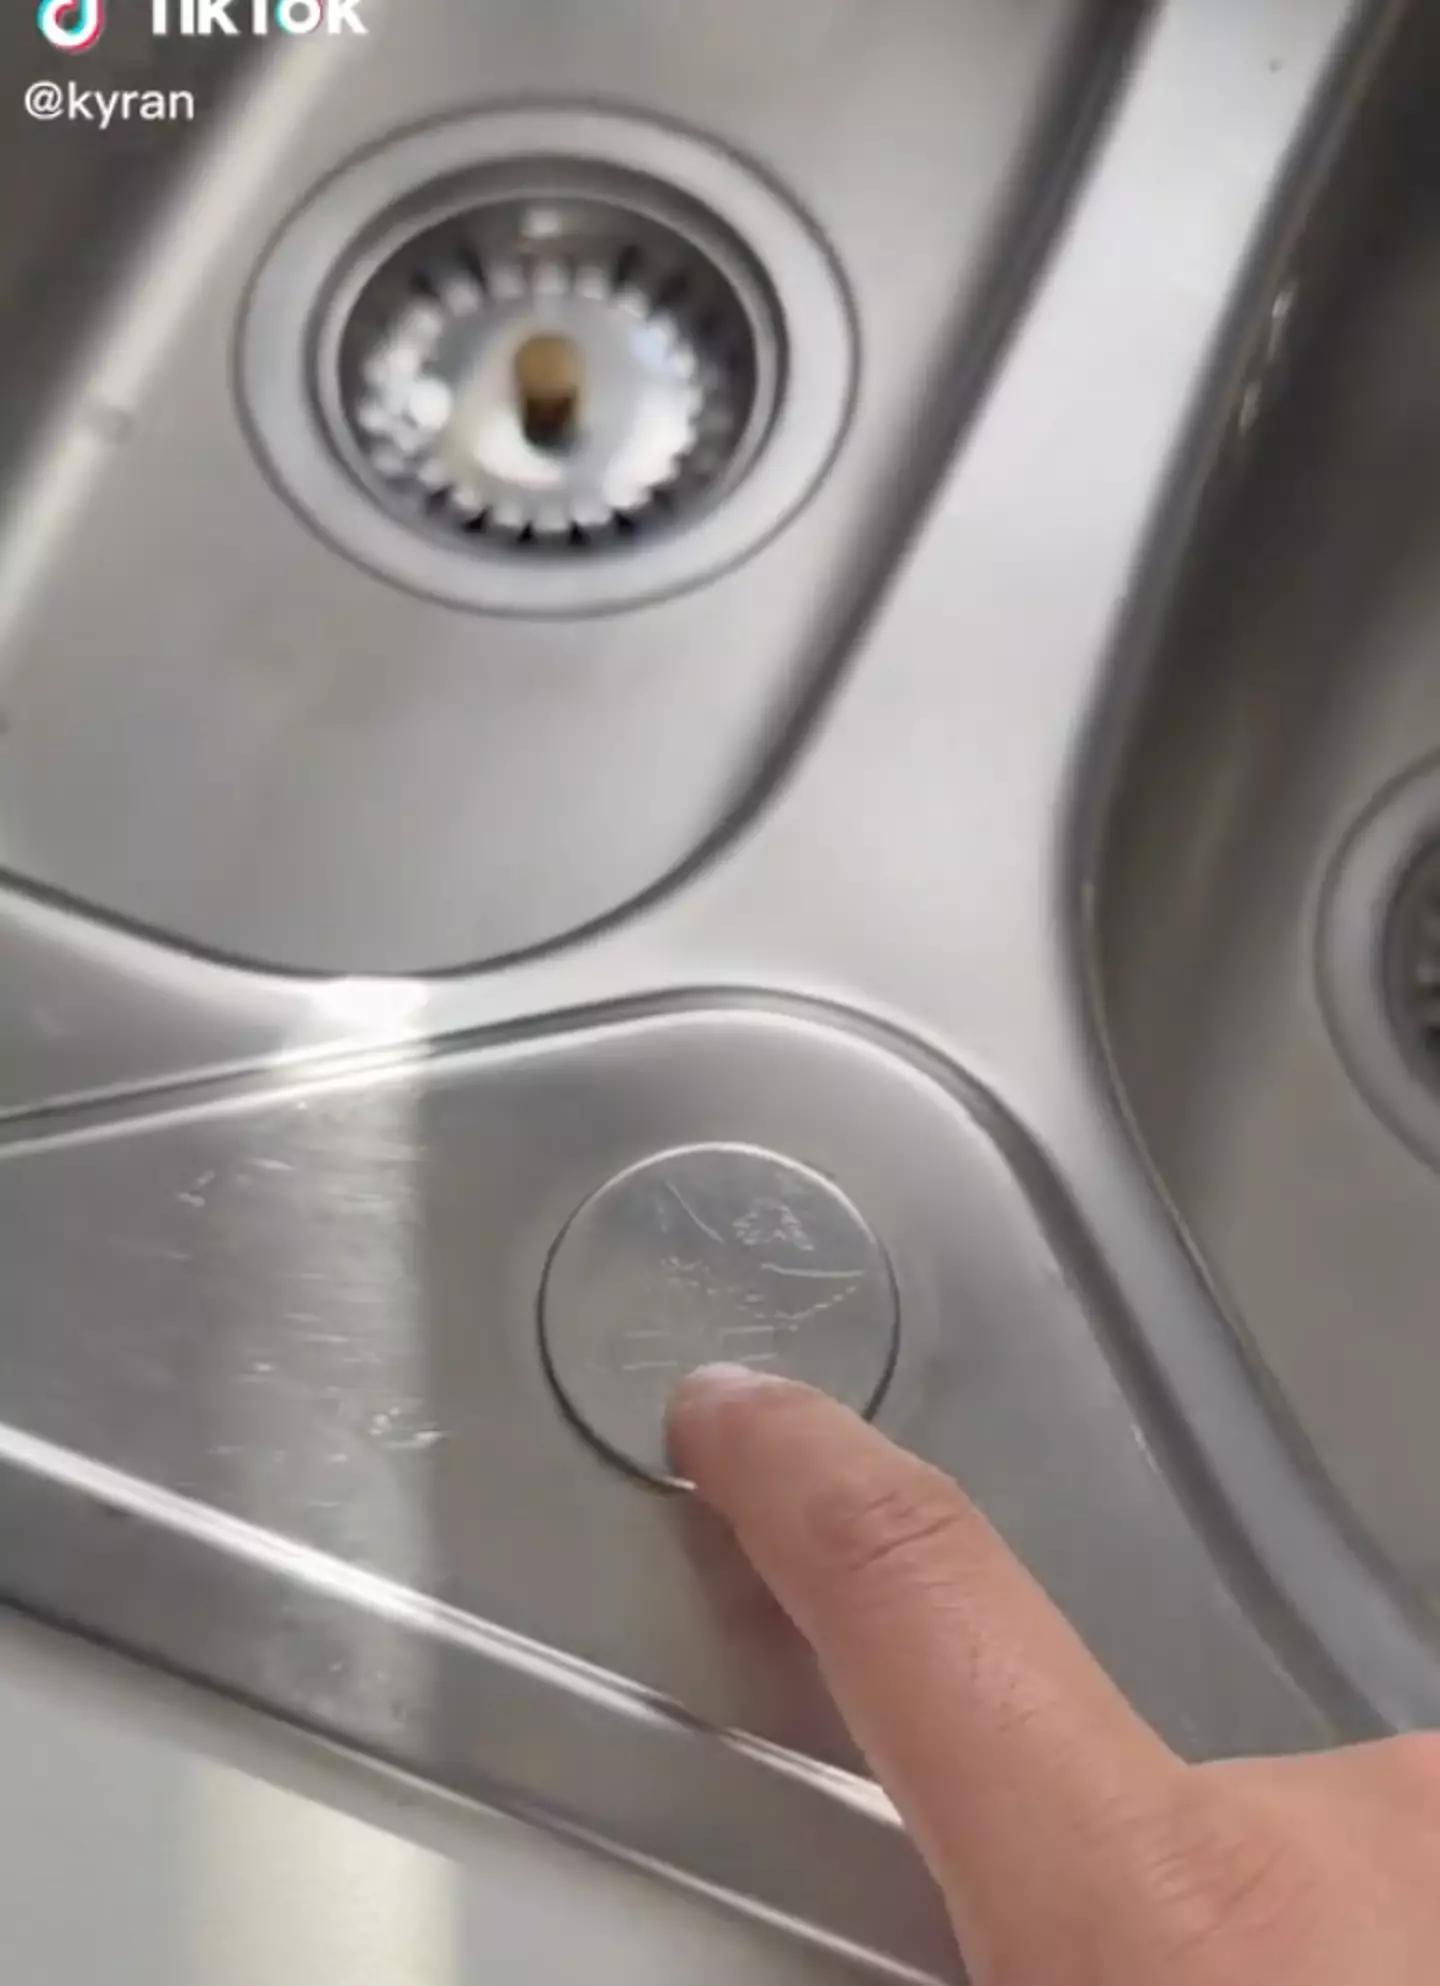 A TikToker has revealed a life hack for the circle on your sink.